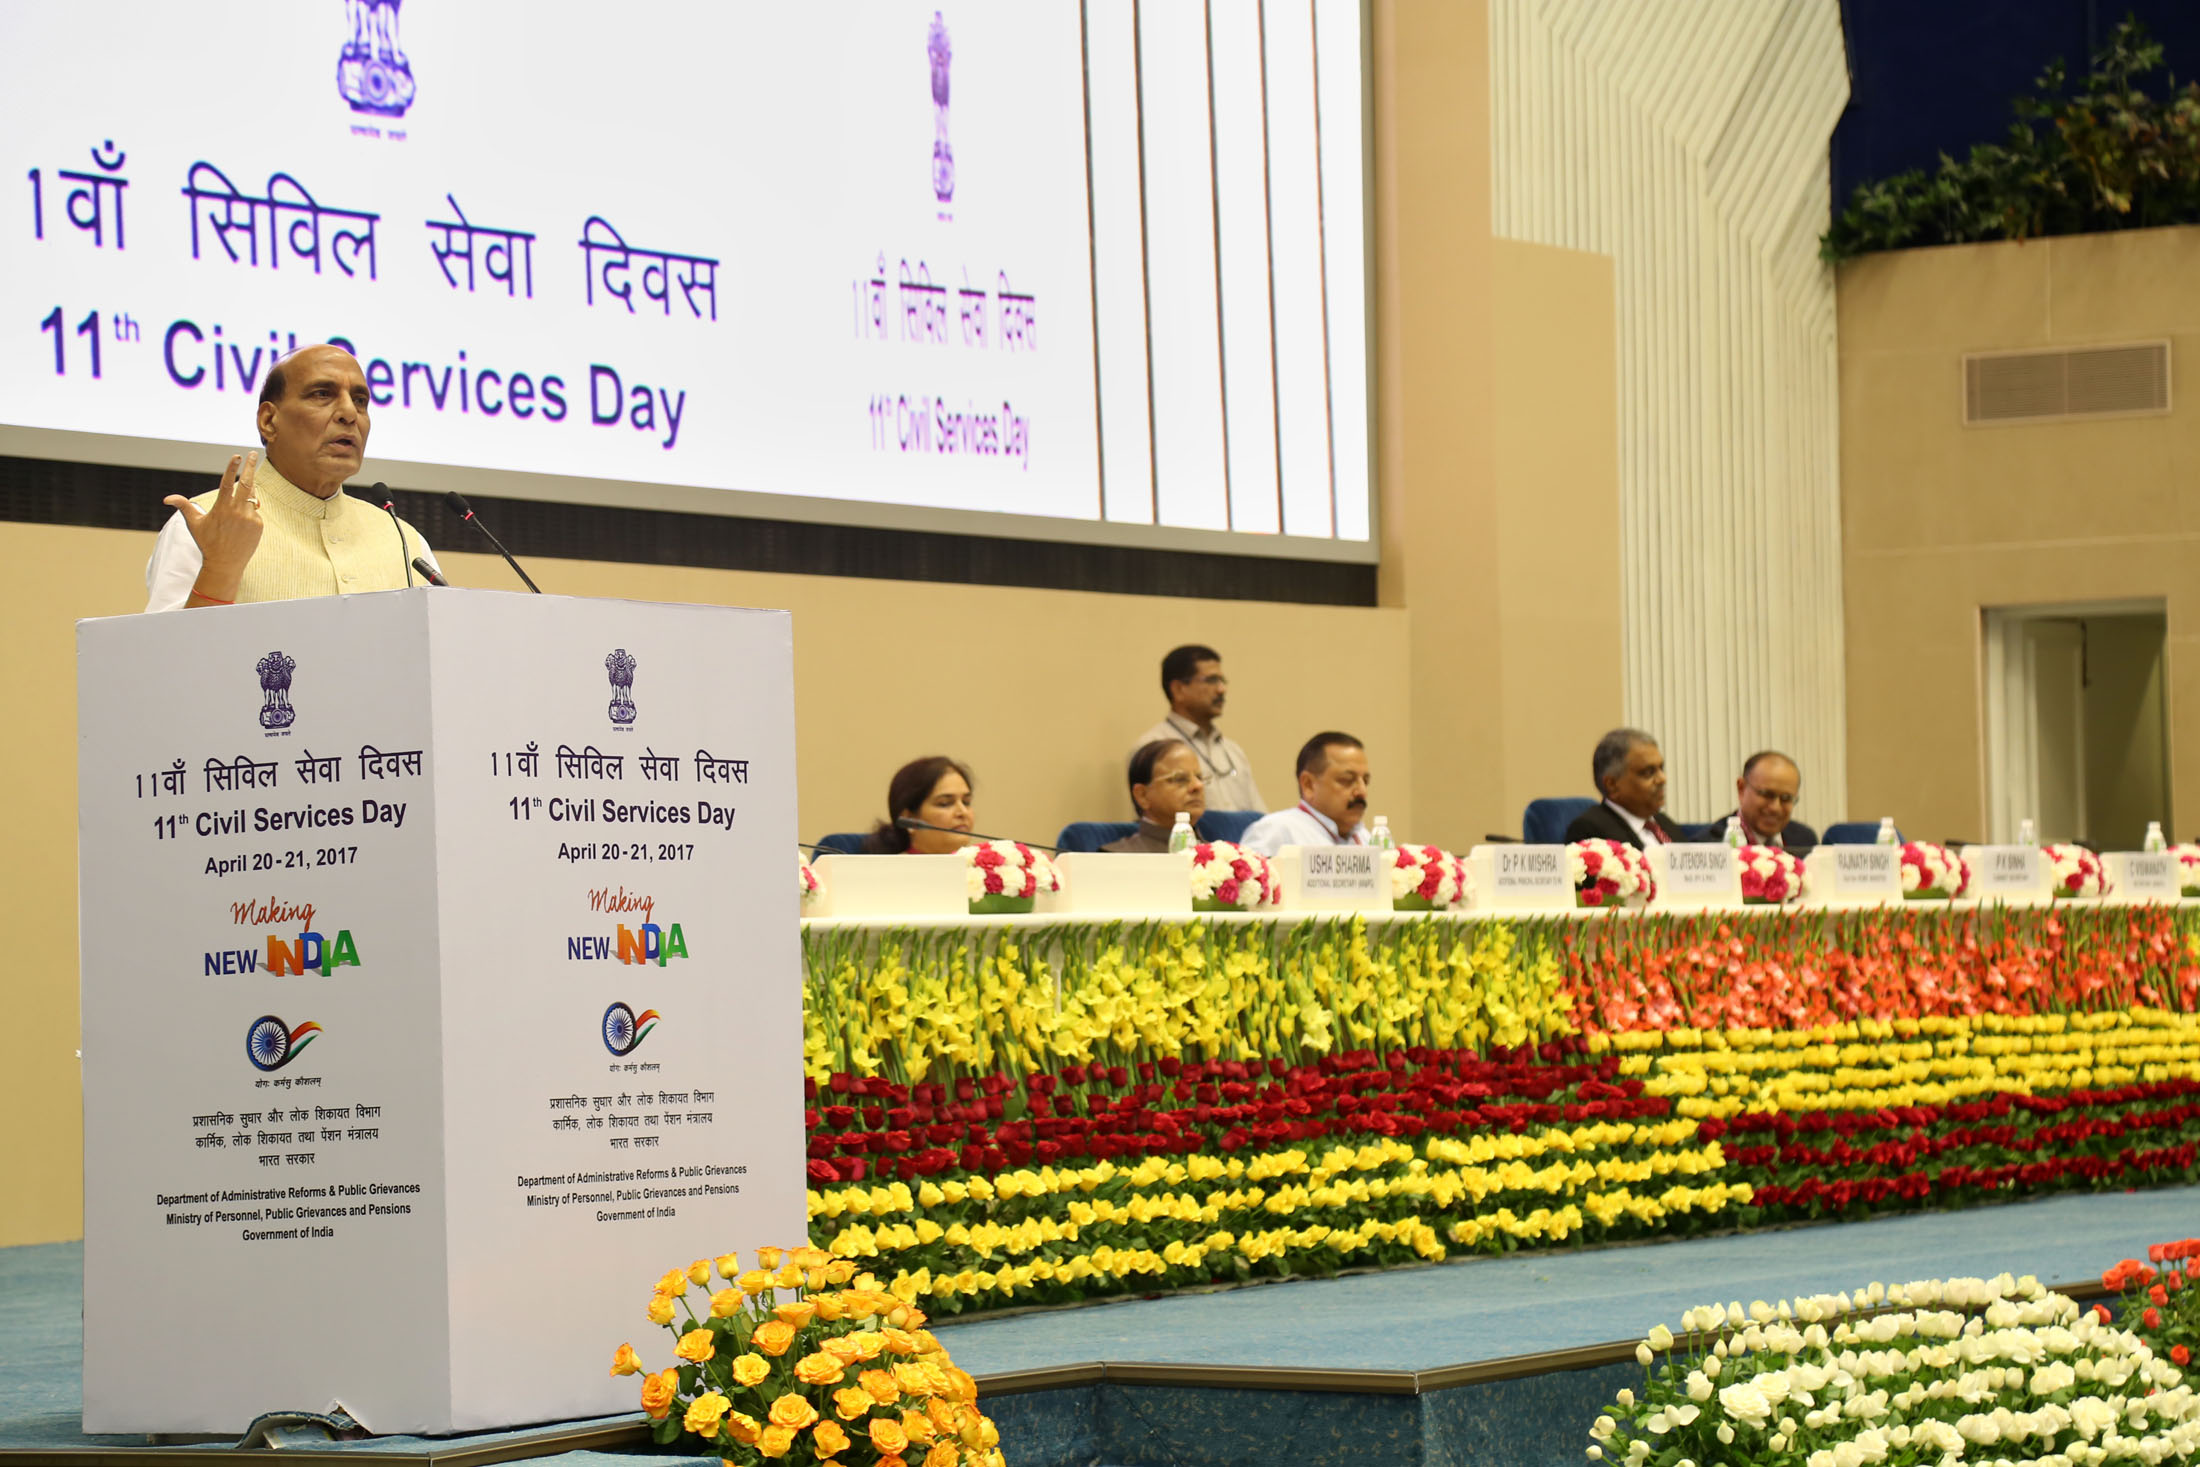 The Union Home Minister, Shri Rajnath Singh addressing at the inauguration of the two-day Civil Services Day 2017 function, in New Delhi on April 20, 2017. 	The Minister of State for Development of North Eastern Region (I/C), Prime Ministers Office, Personnel, Public Grievances & Pensions, Atomic Energy and Space, Dr. Jitendra Singh, the Cabinet Secretary, Shri P.K. Sinha, the Additional Principal Secretary to the Prime Minister, Dr. P.K. Mishra and other dignitaries are also seen.